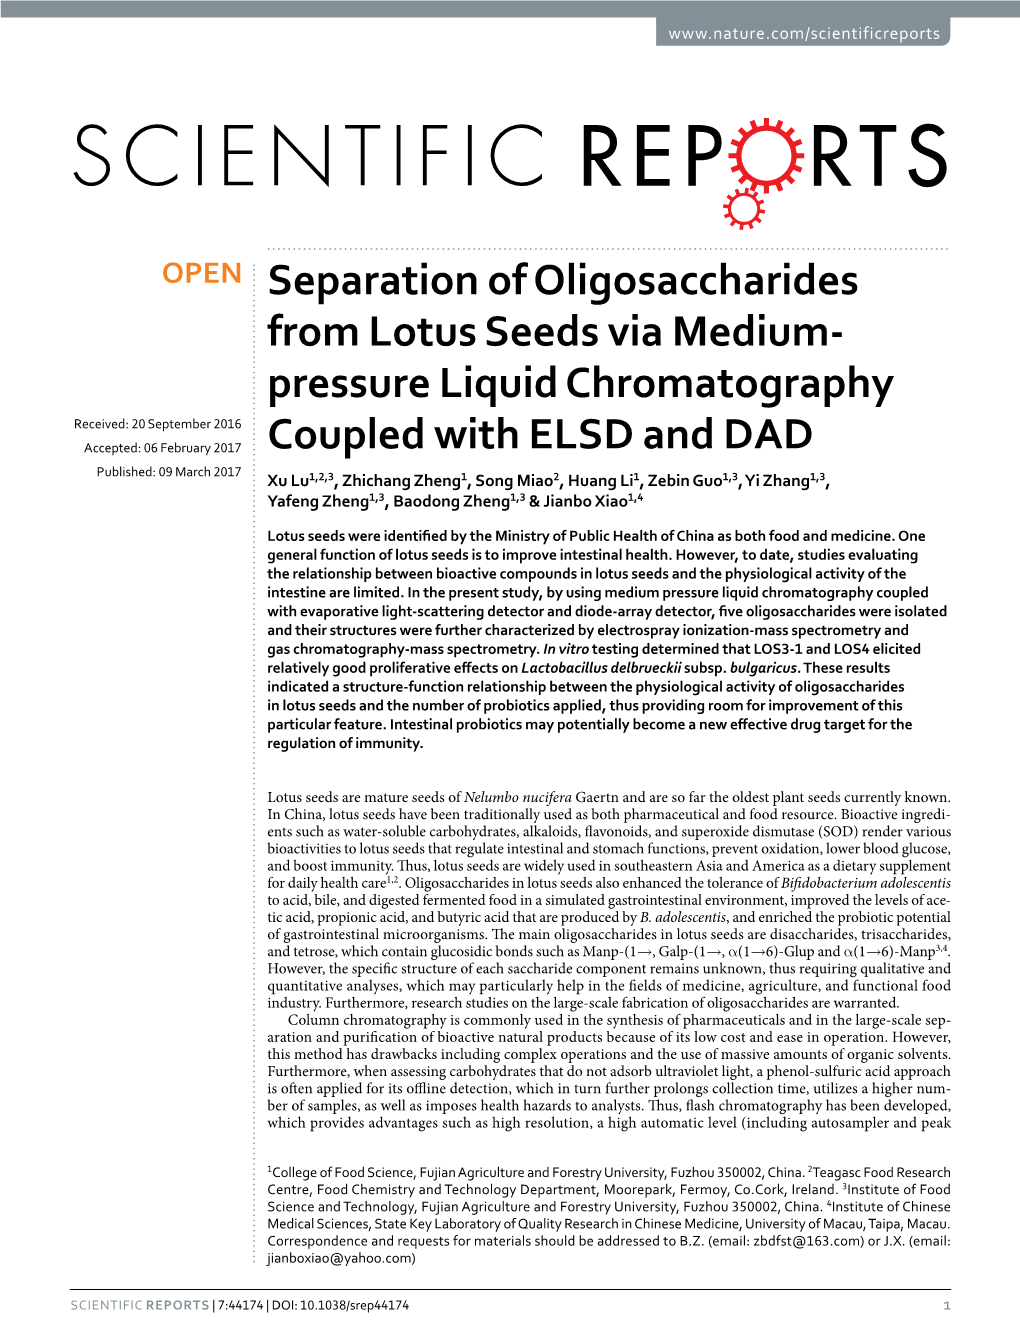 Separation of Oligosaccharides from Lotus Seeds Via Medium-Pressure Liquid Chromatography Coupled with ELSD and DAD